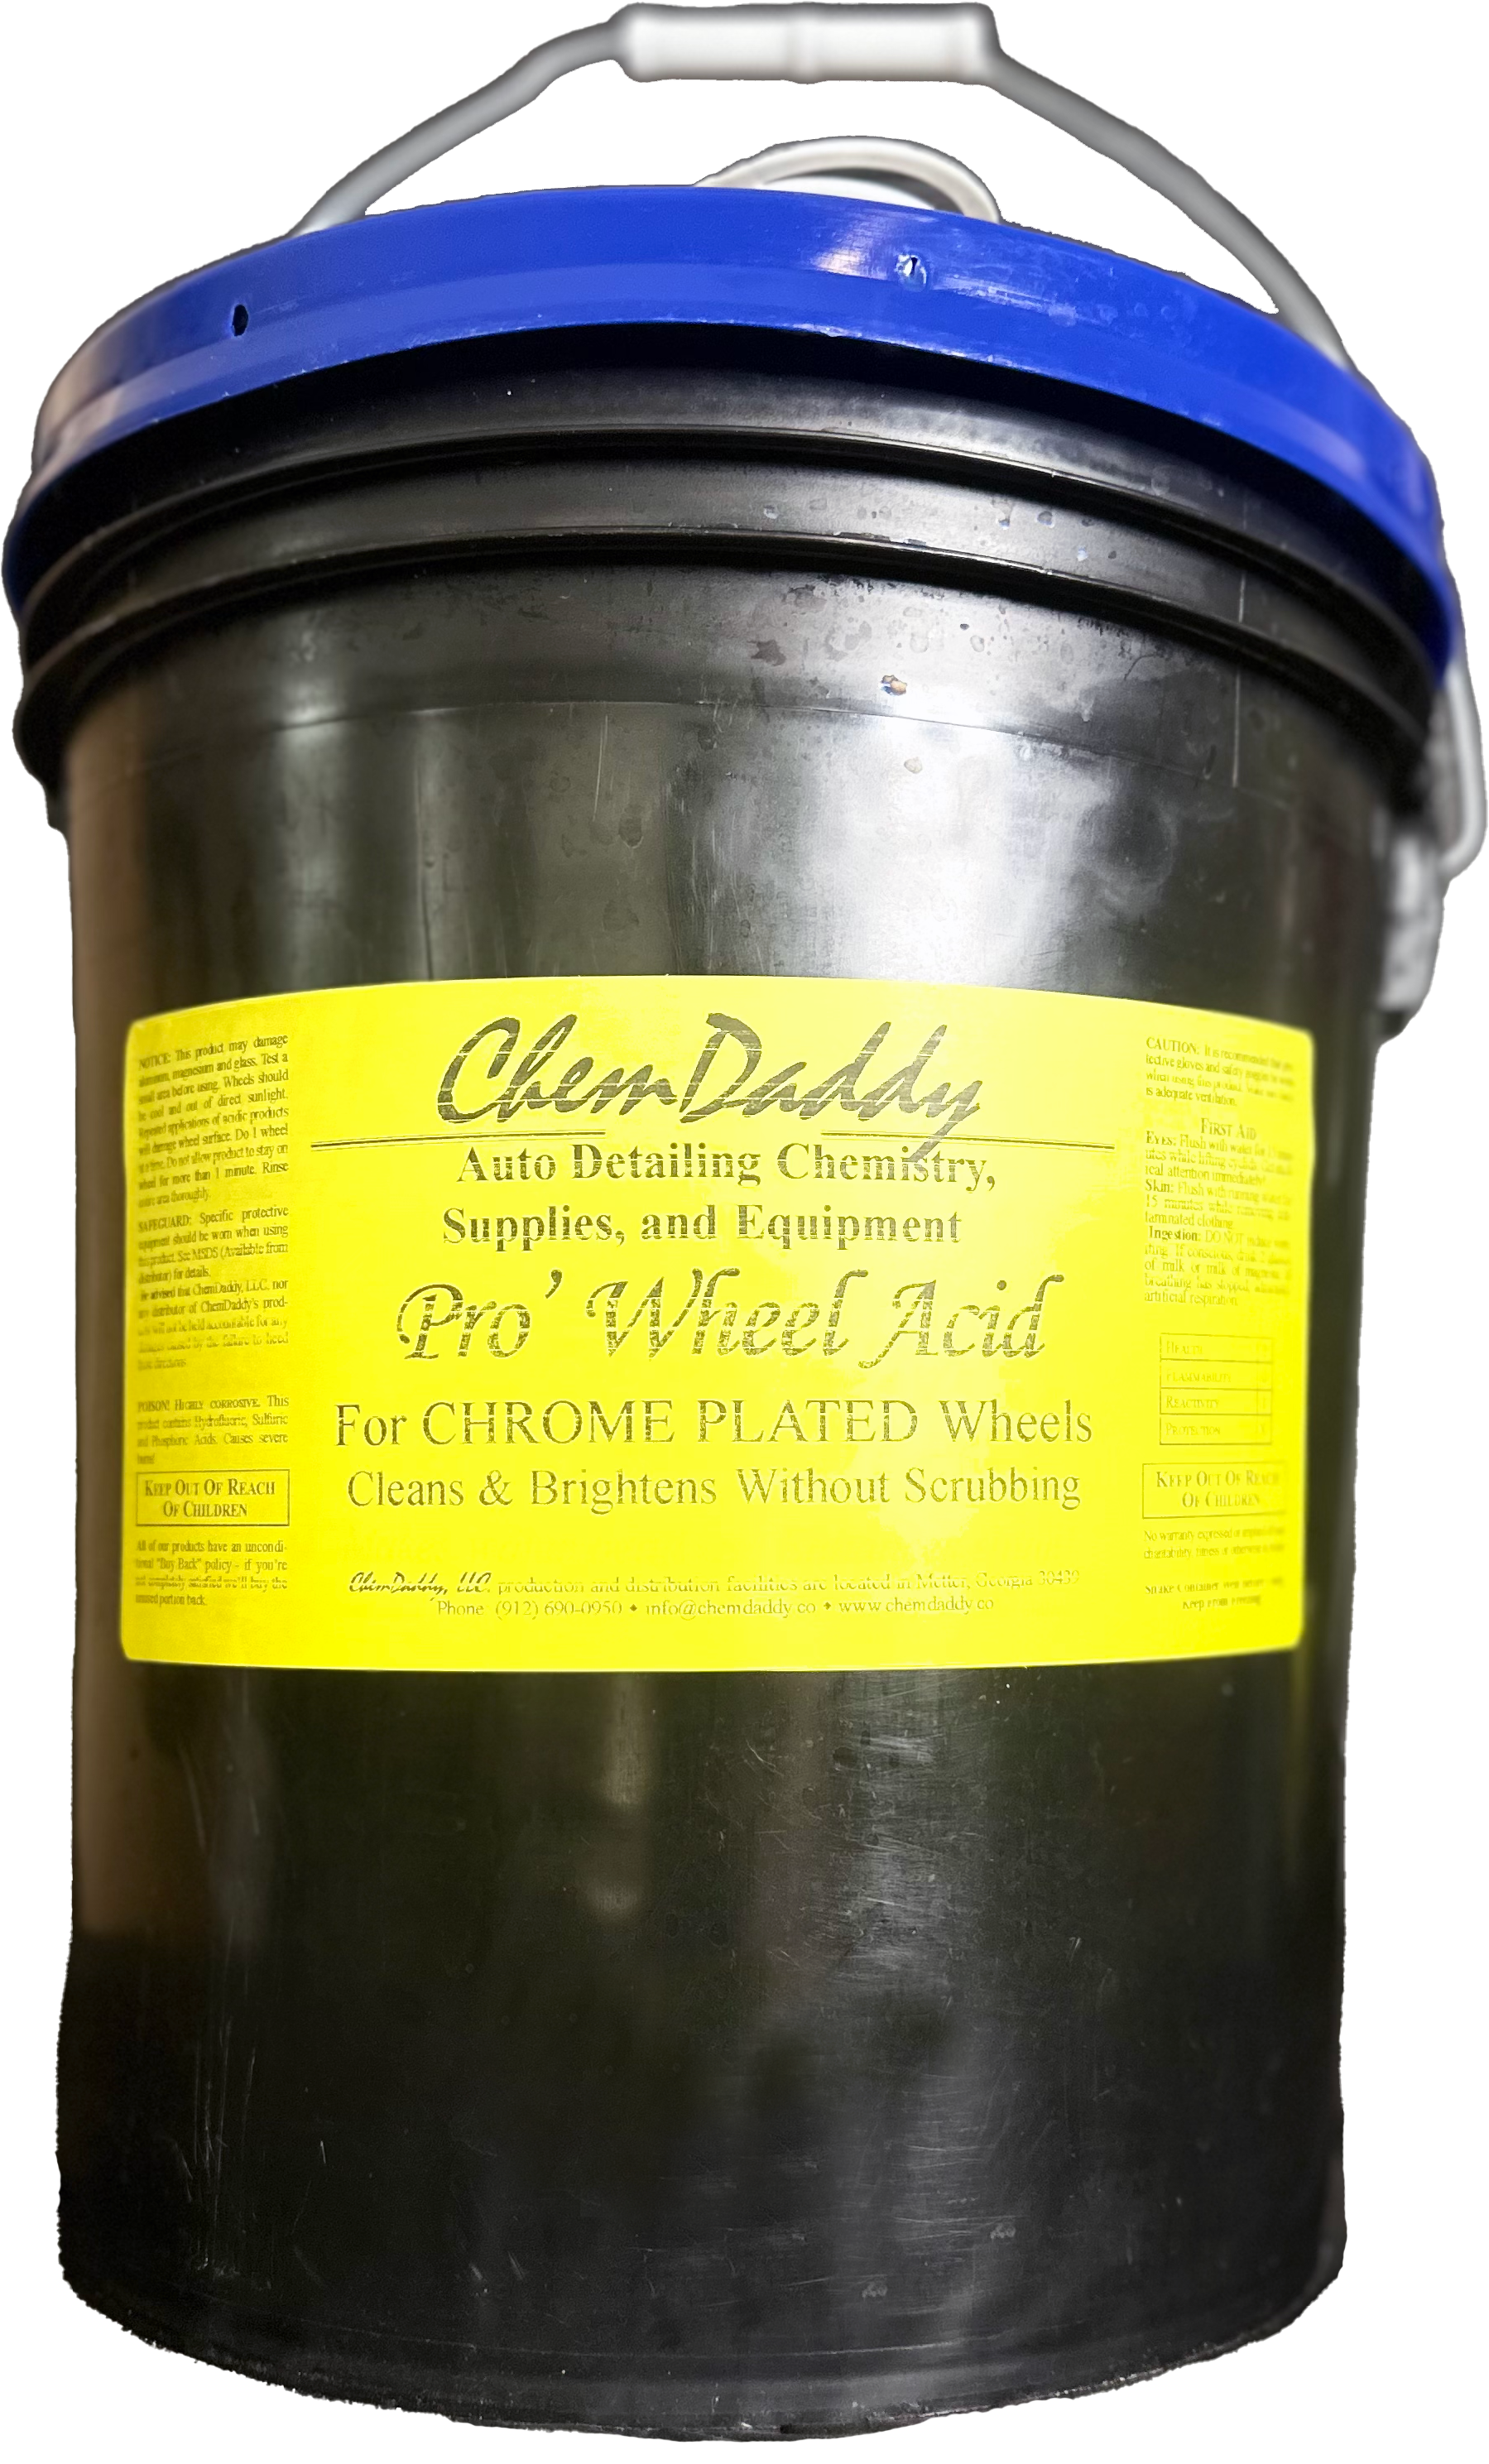 ChemDaddy's Pro Wheel Acid™ - ChemDaddy - Chemistry - Best for Wheel care without scrubbing. cleaning supplies for car.